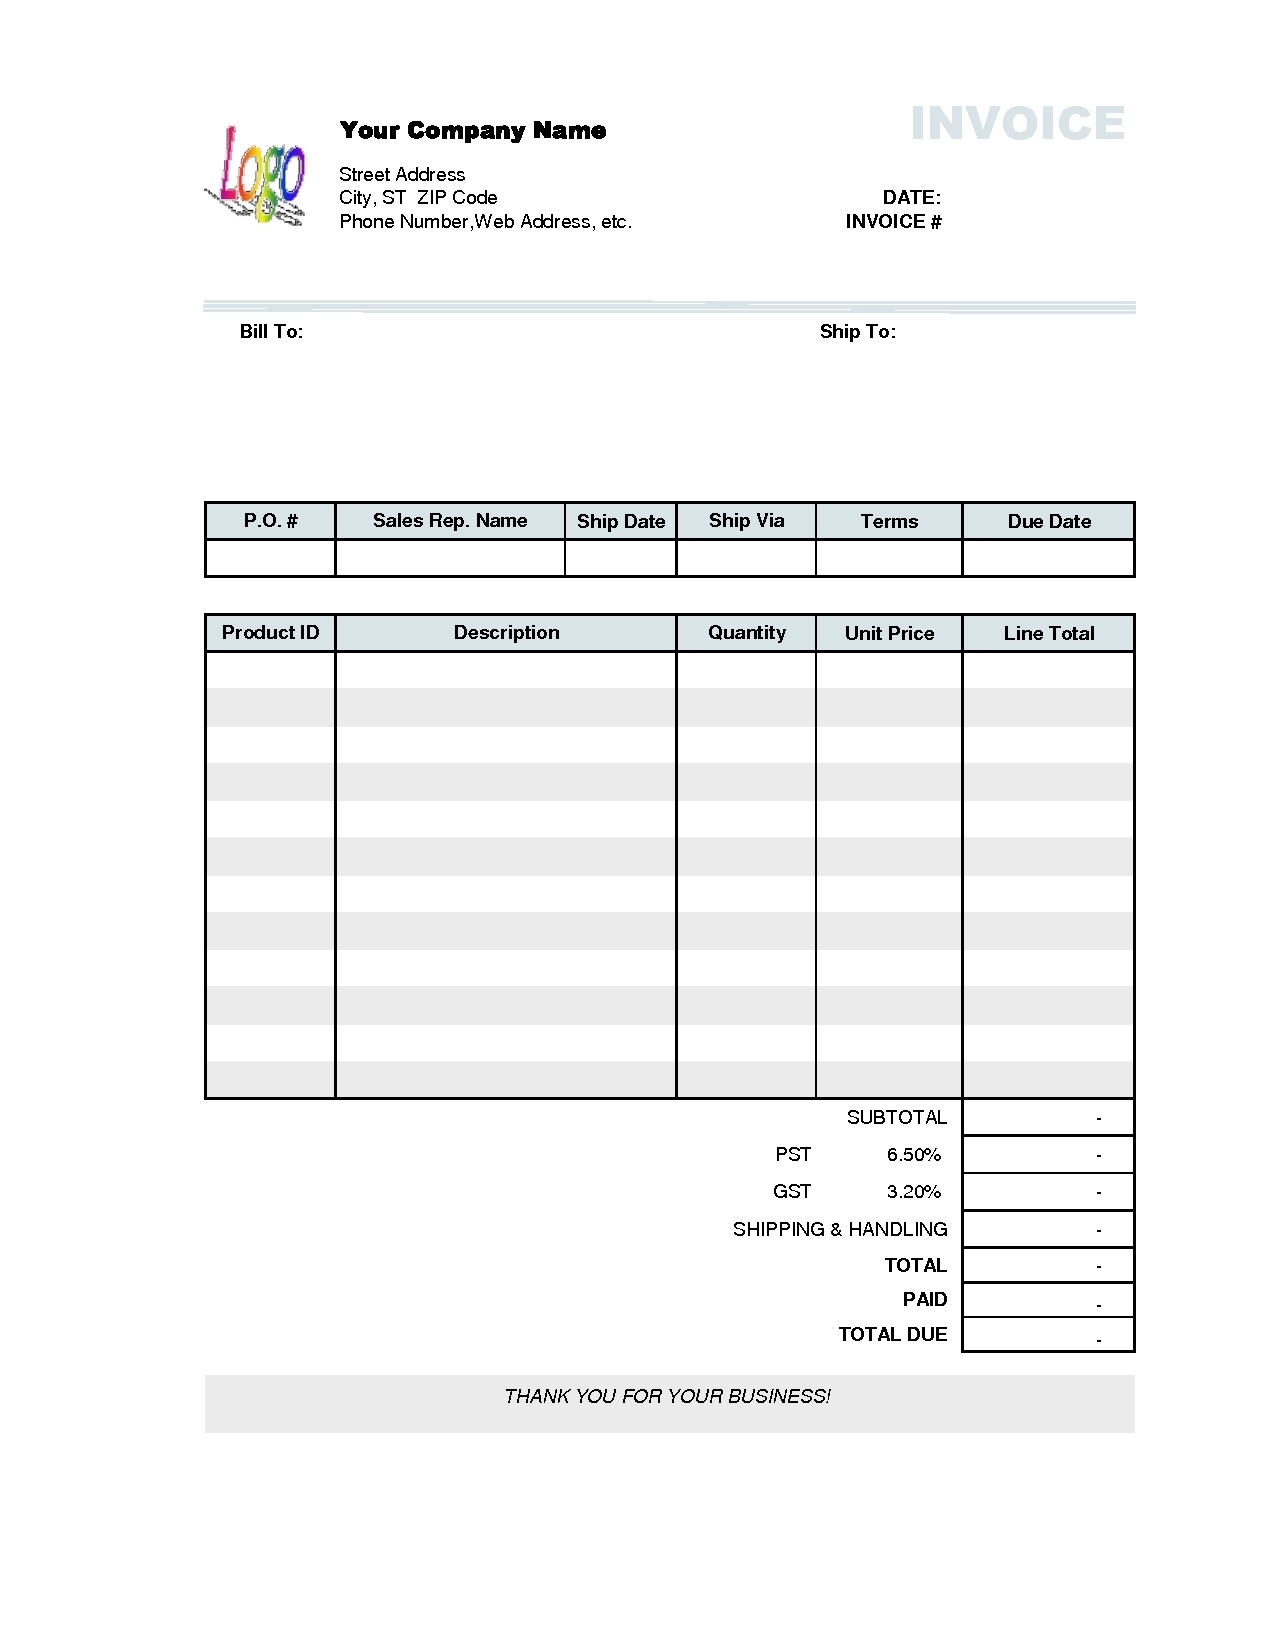 invoice online free invoice template free 2016 free invoices online form